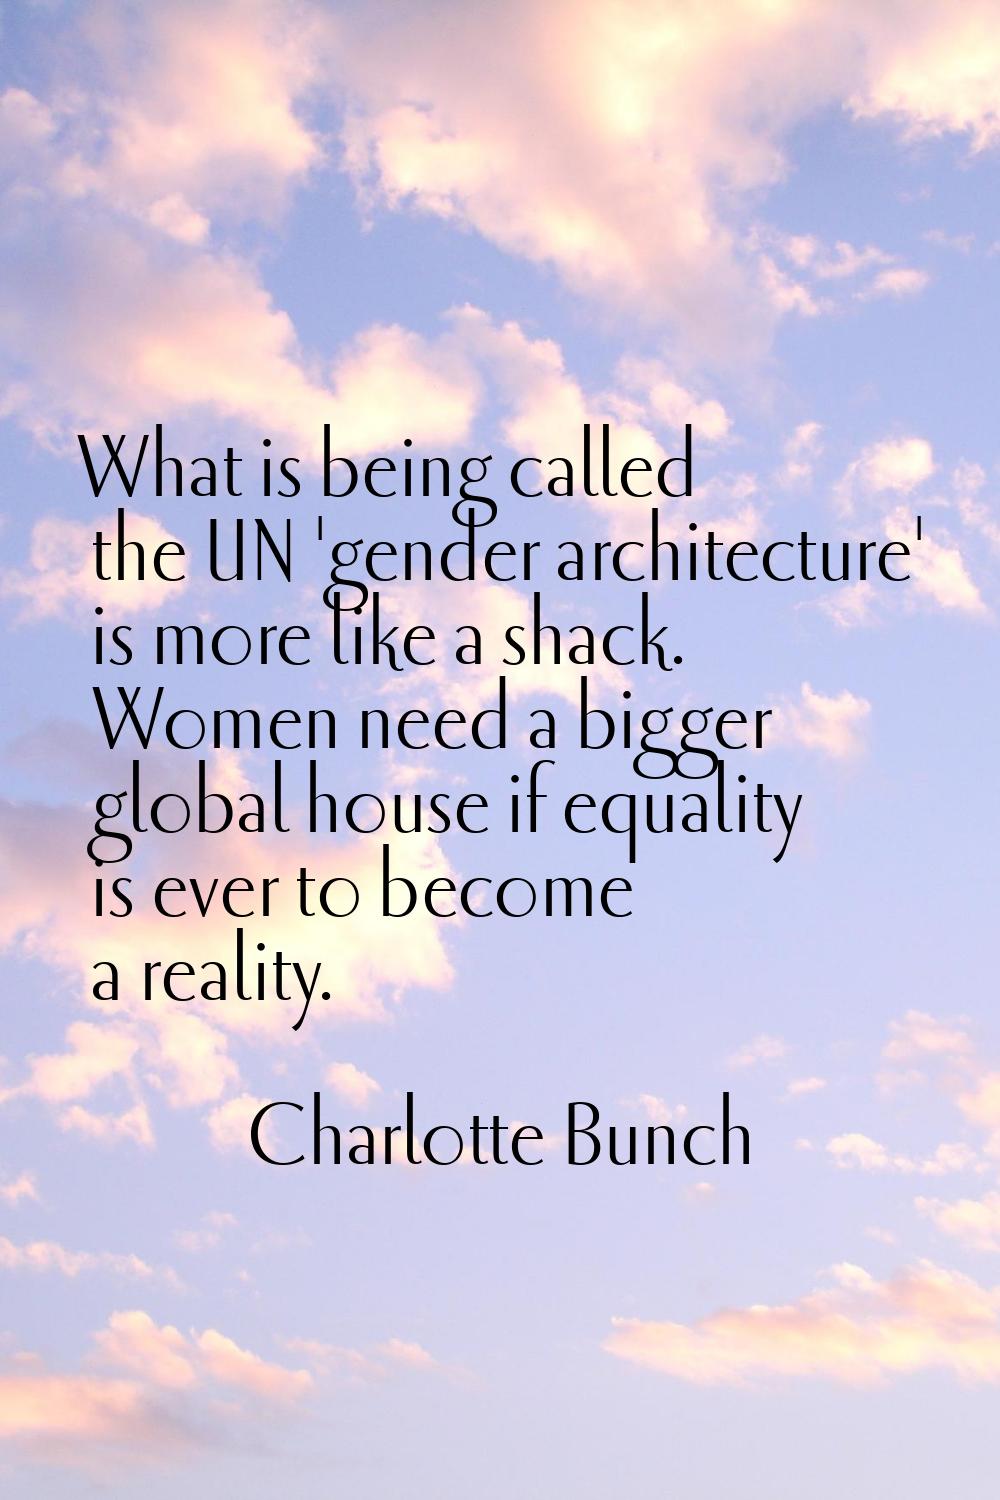 What is being called the UN 'gender architecture' is more like a shack. Women need a bigger global 